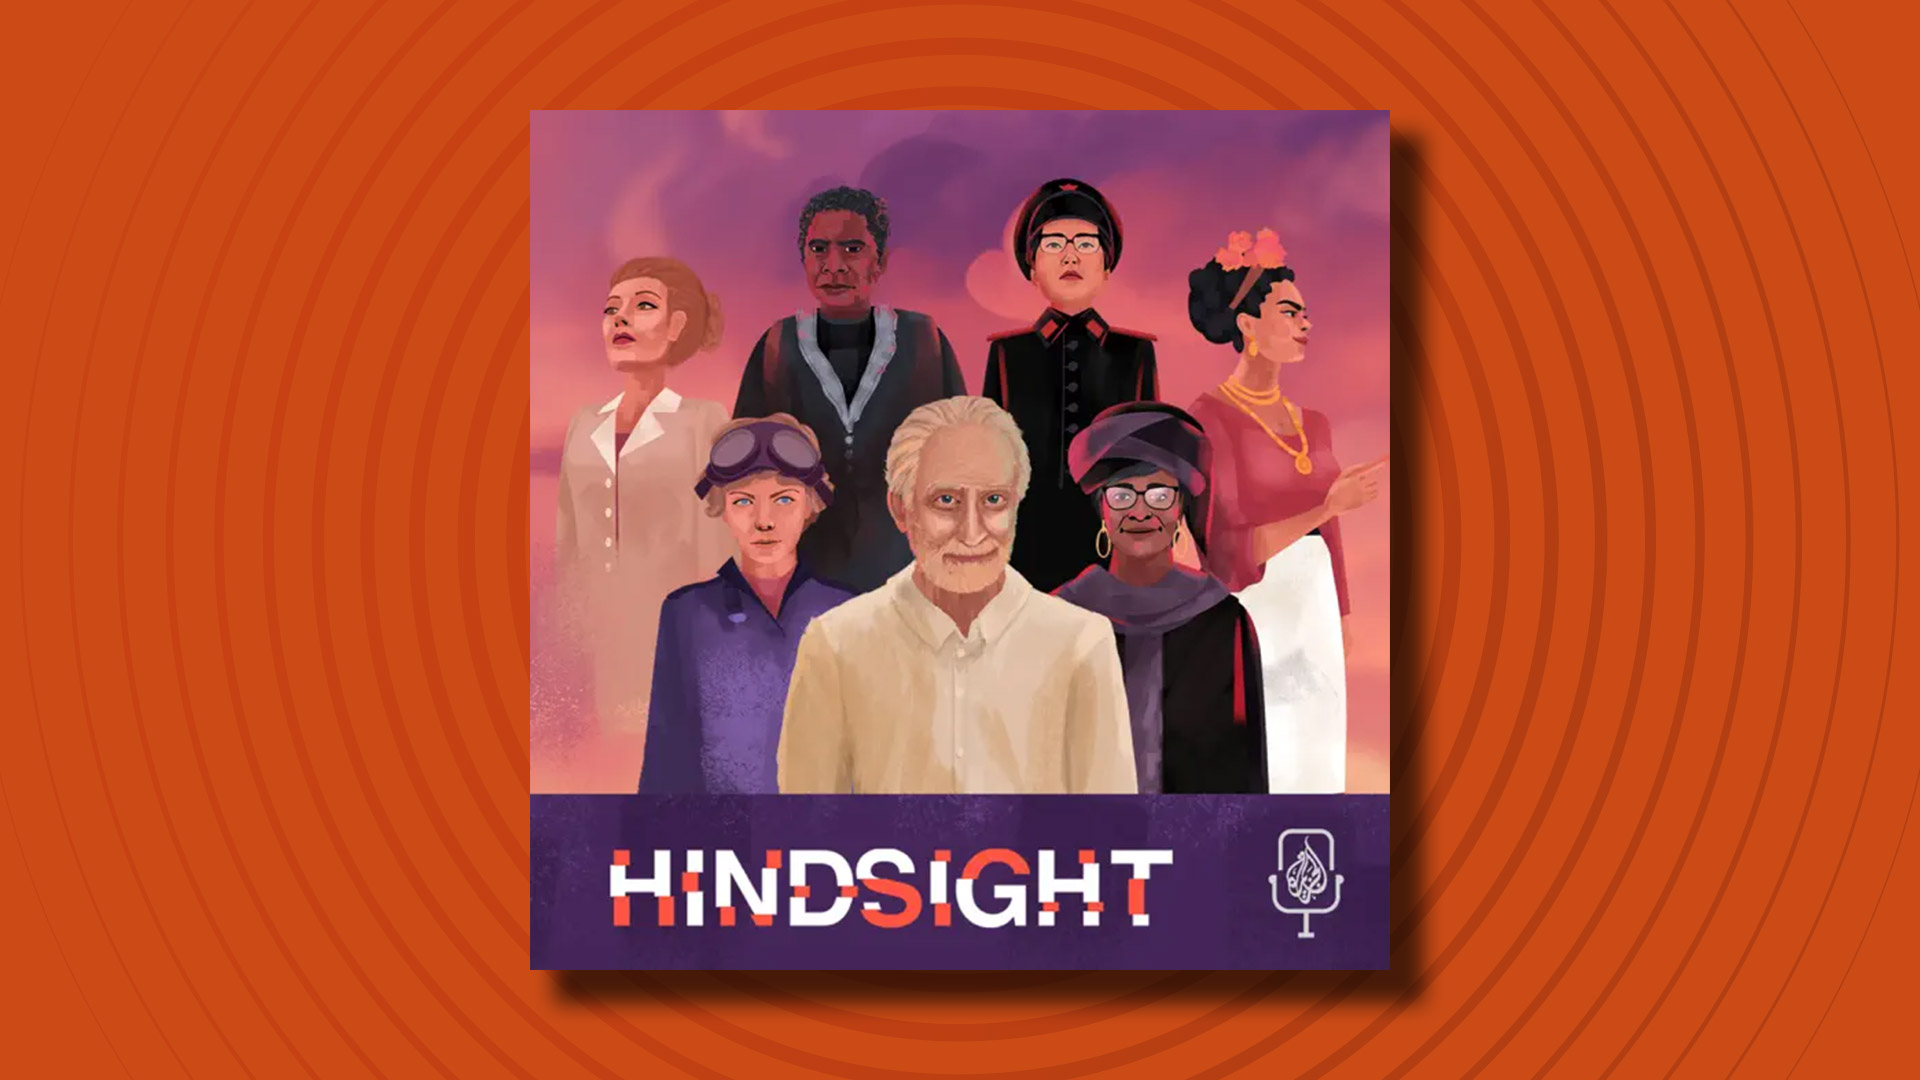 The logo of the Hindsight podcast on an orange background